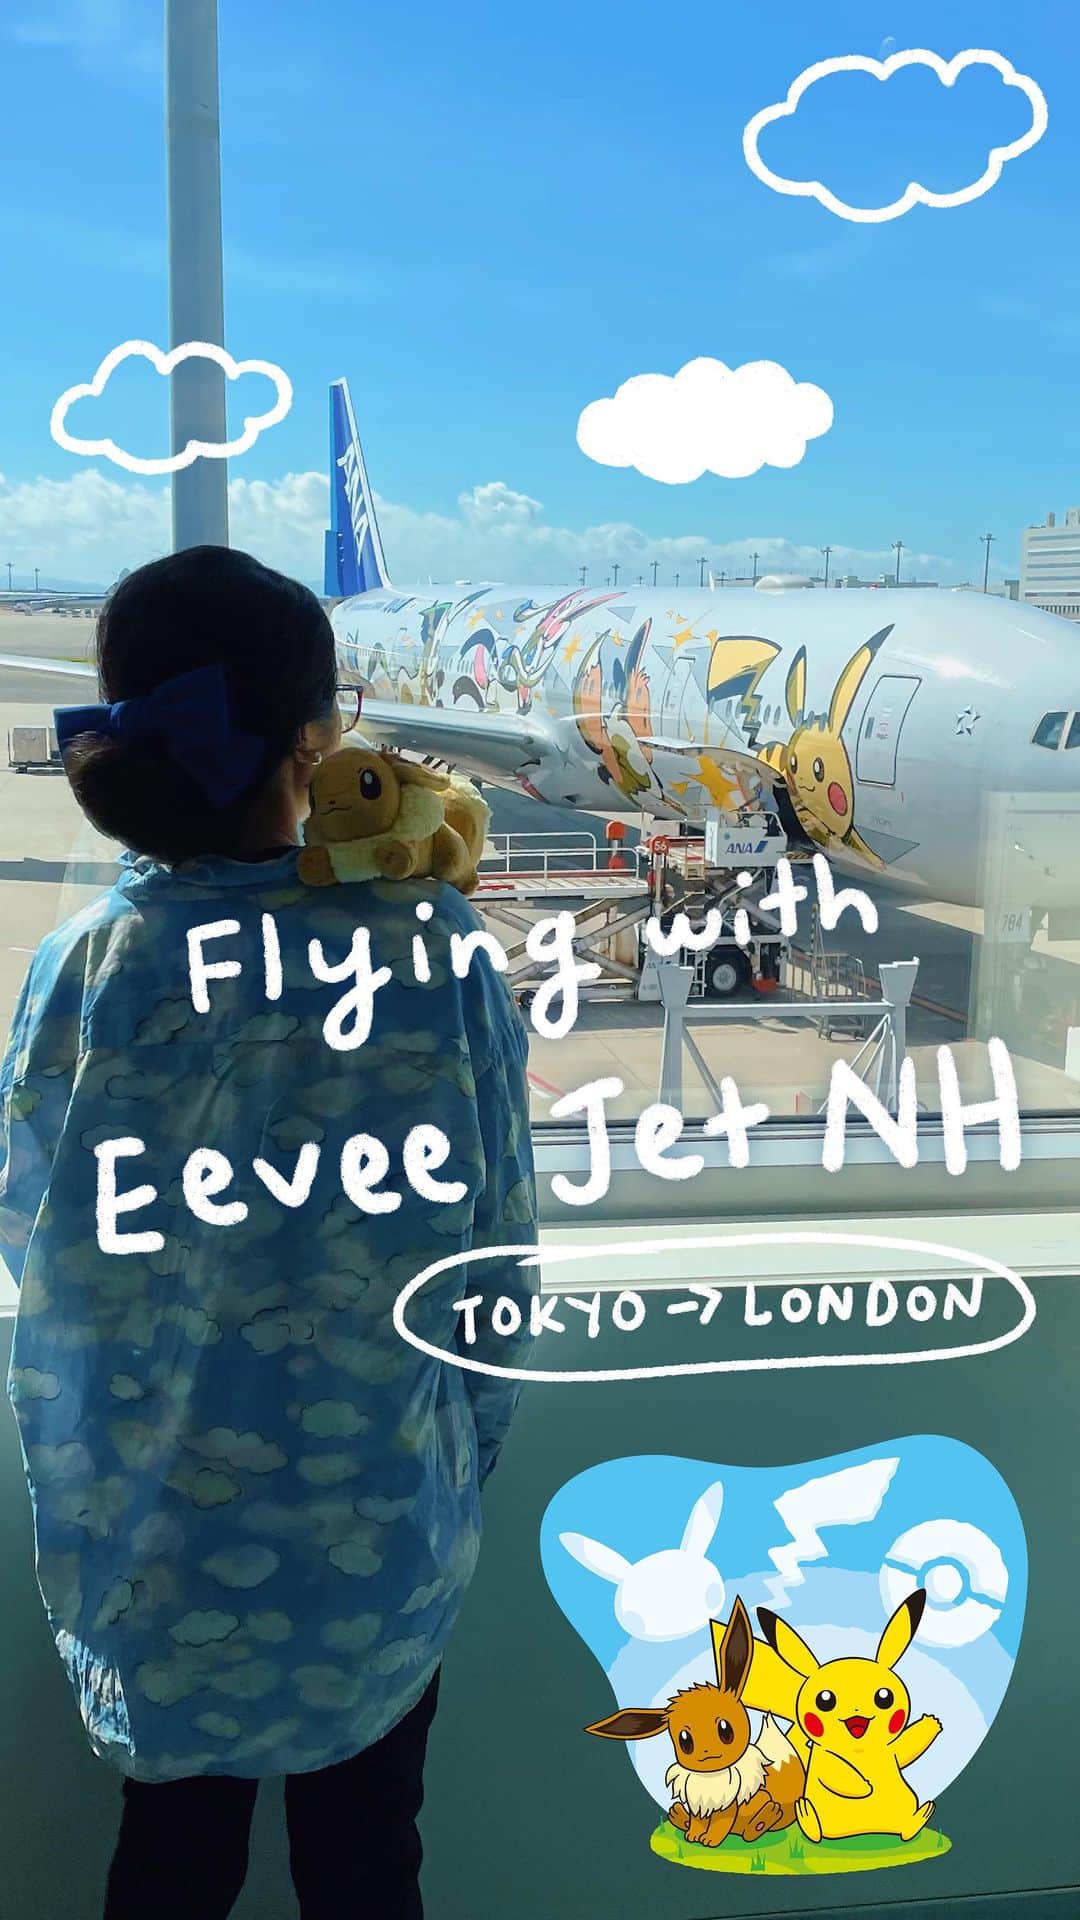 All Nippon Airwaysのインスタグラム：「⚡️ Join me as I ride the first Eevee Jet NH flight from Tokyo to London! ✈️ Thank you @allnipponairways, for making my dream trip with Eevee & Pikachu come true. 💙   What I loved the most about my ANA flight journey with Eevee: * The kawaii aircraft will make you feel more excited about your trip! 💕  * Friendly & super accommodating ANA cabin attendants (they wore the cutest aprons!) * Commemorative items from the Eevee Jet NH flight (envelope, boarding pass, wooden tag, & sticker). As a stationery lover, these are precious. 💯  * In-flight entertainment! They even have a Pokémon Kids TV! 📺  * The meals, snacks, and drinks! You will not get hungry on this flight. 😋  * Eevee in the kitchen. 📷 You can take photos with the Eevee plush doll~ * The attention to detail, such as the Pokémon BGM when you enter the aircraft, & the Pokémon headrest design. 🎶   Check my “Eevee Jet NH” highlight for more stories about Rainbowholic team’s flight experience.  For more info, please check: https://www.ana.co.jp/en/jp/international/theme/pikachujet/ (or check the link in bio: @rainbowholic) 👀   So, what do you think?  Let me know below!  Don’t forget to watch Part 1 of this special series!  🏷️: #allnipponairways #ana #Pokémon #PokémonAirAdventures #eeveejet #pikachujet」